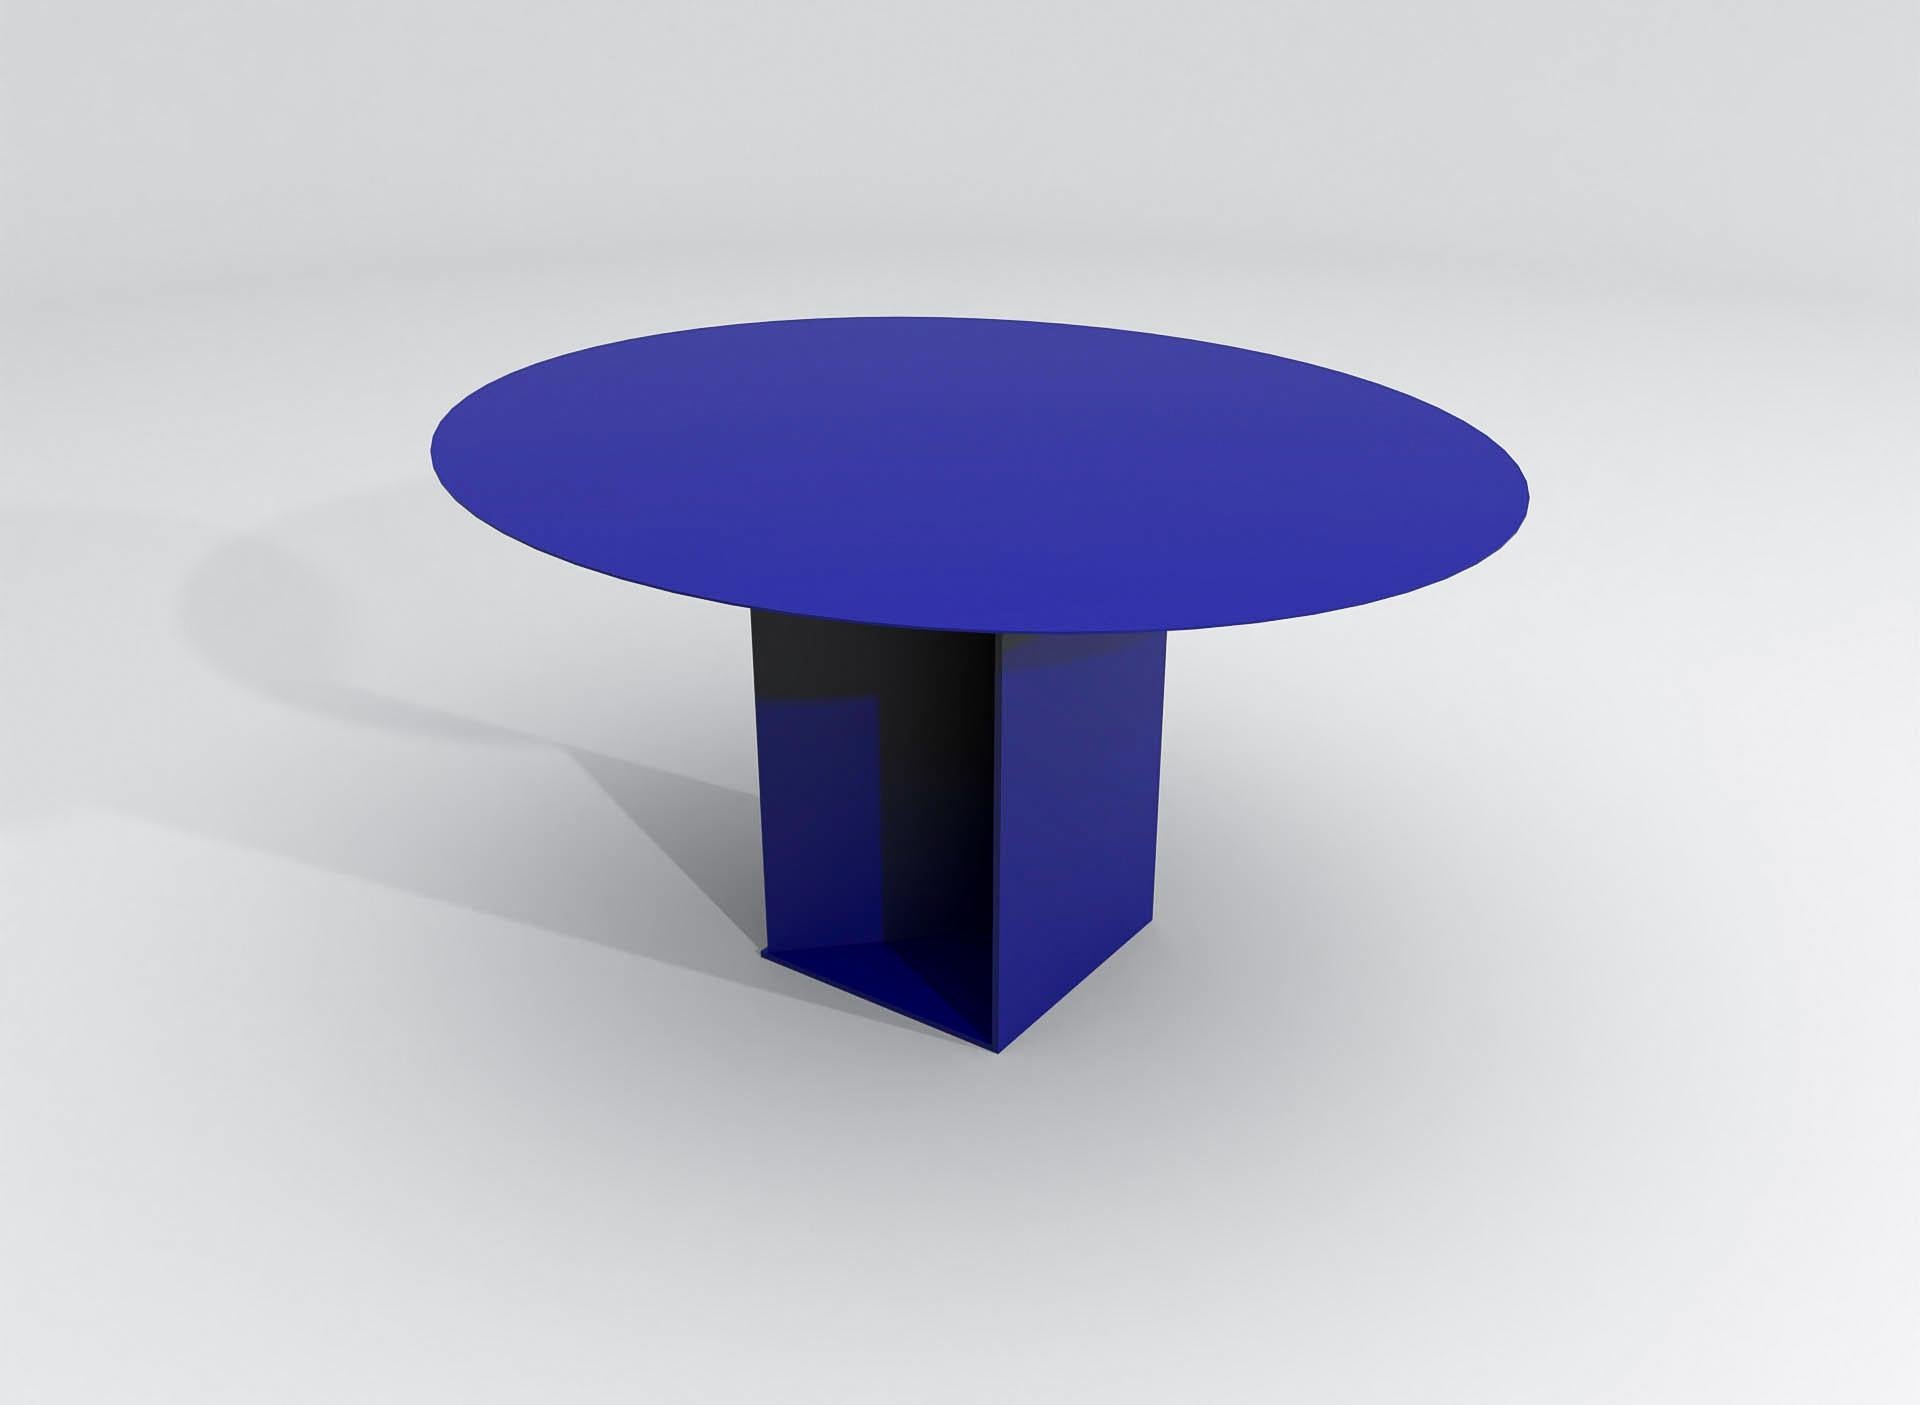 Minimalist Contemporary Round Dining Table in Blue Powder-Coated Steel, Barh Judd Table For Sale